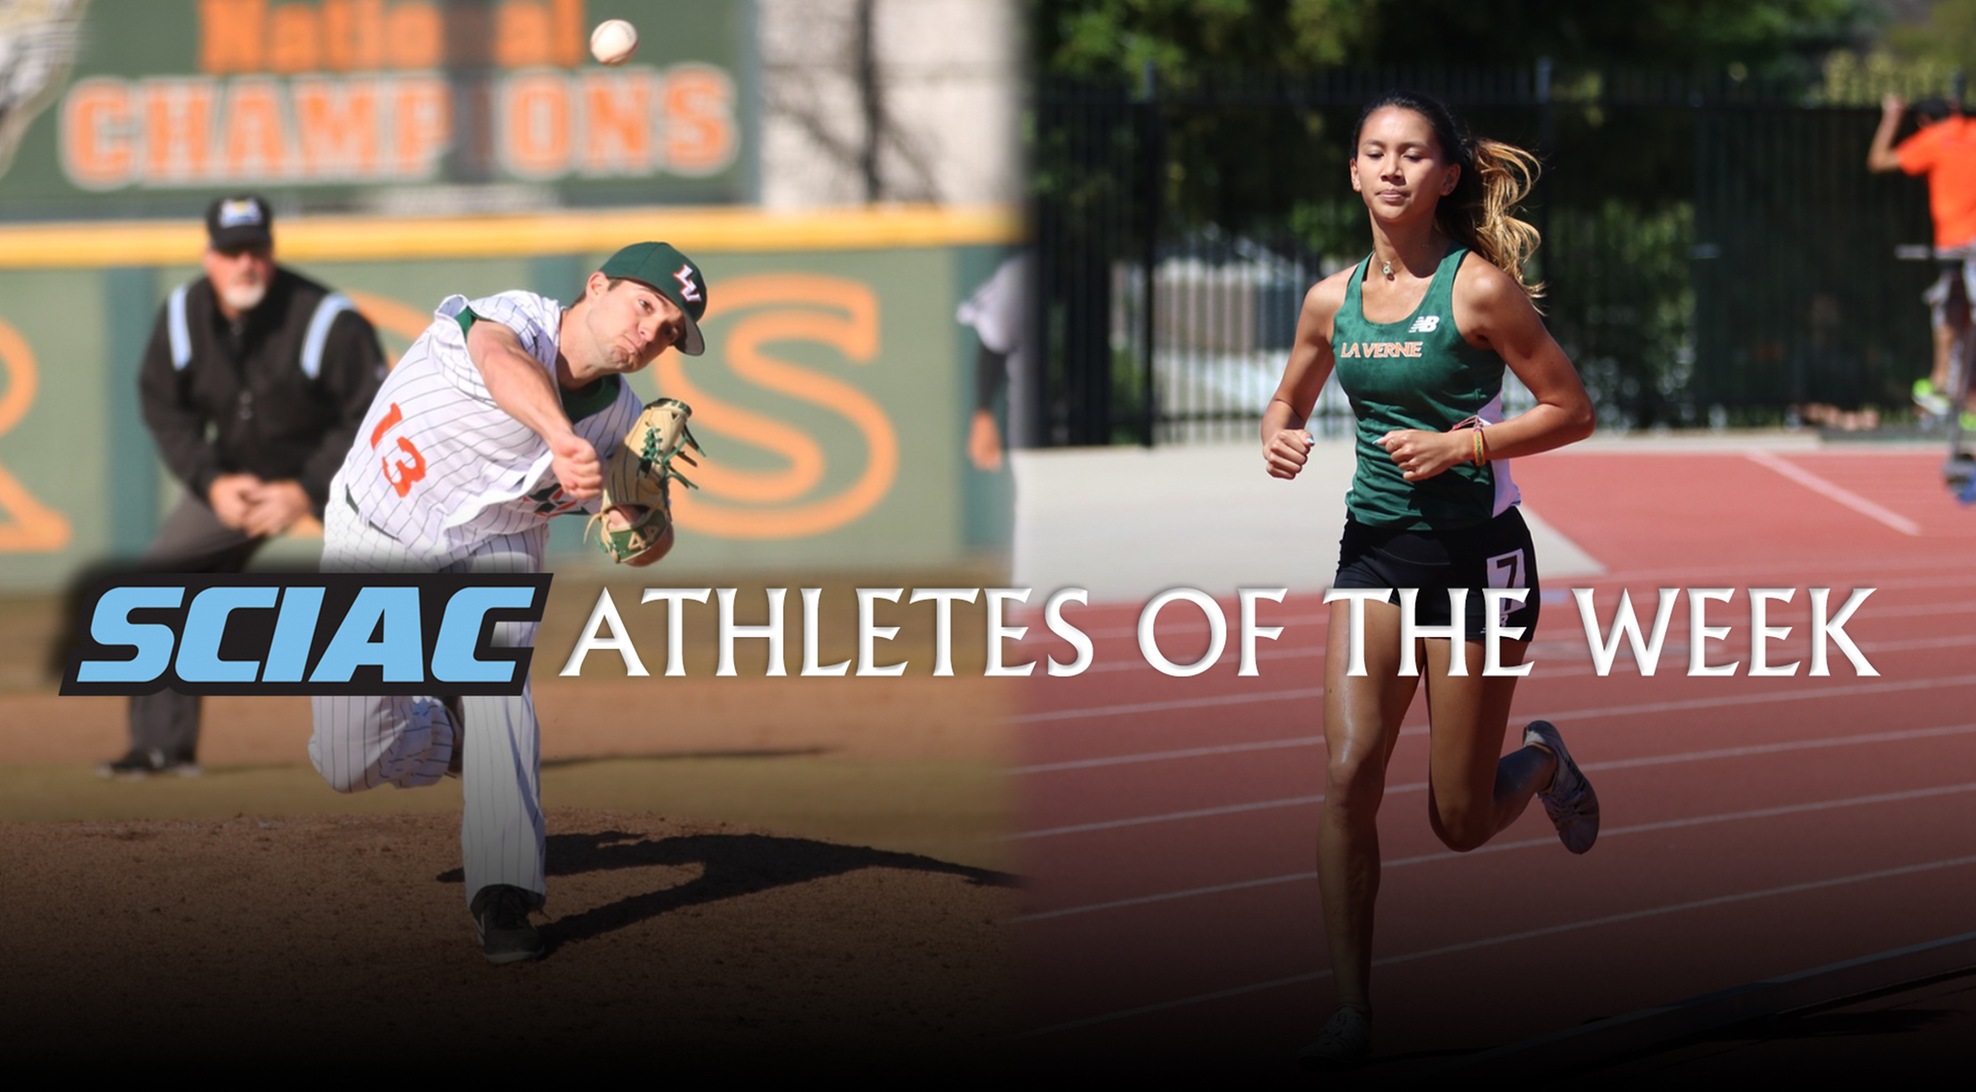 Norman, Cerrillos named SCIAC Athletes of the Week